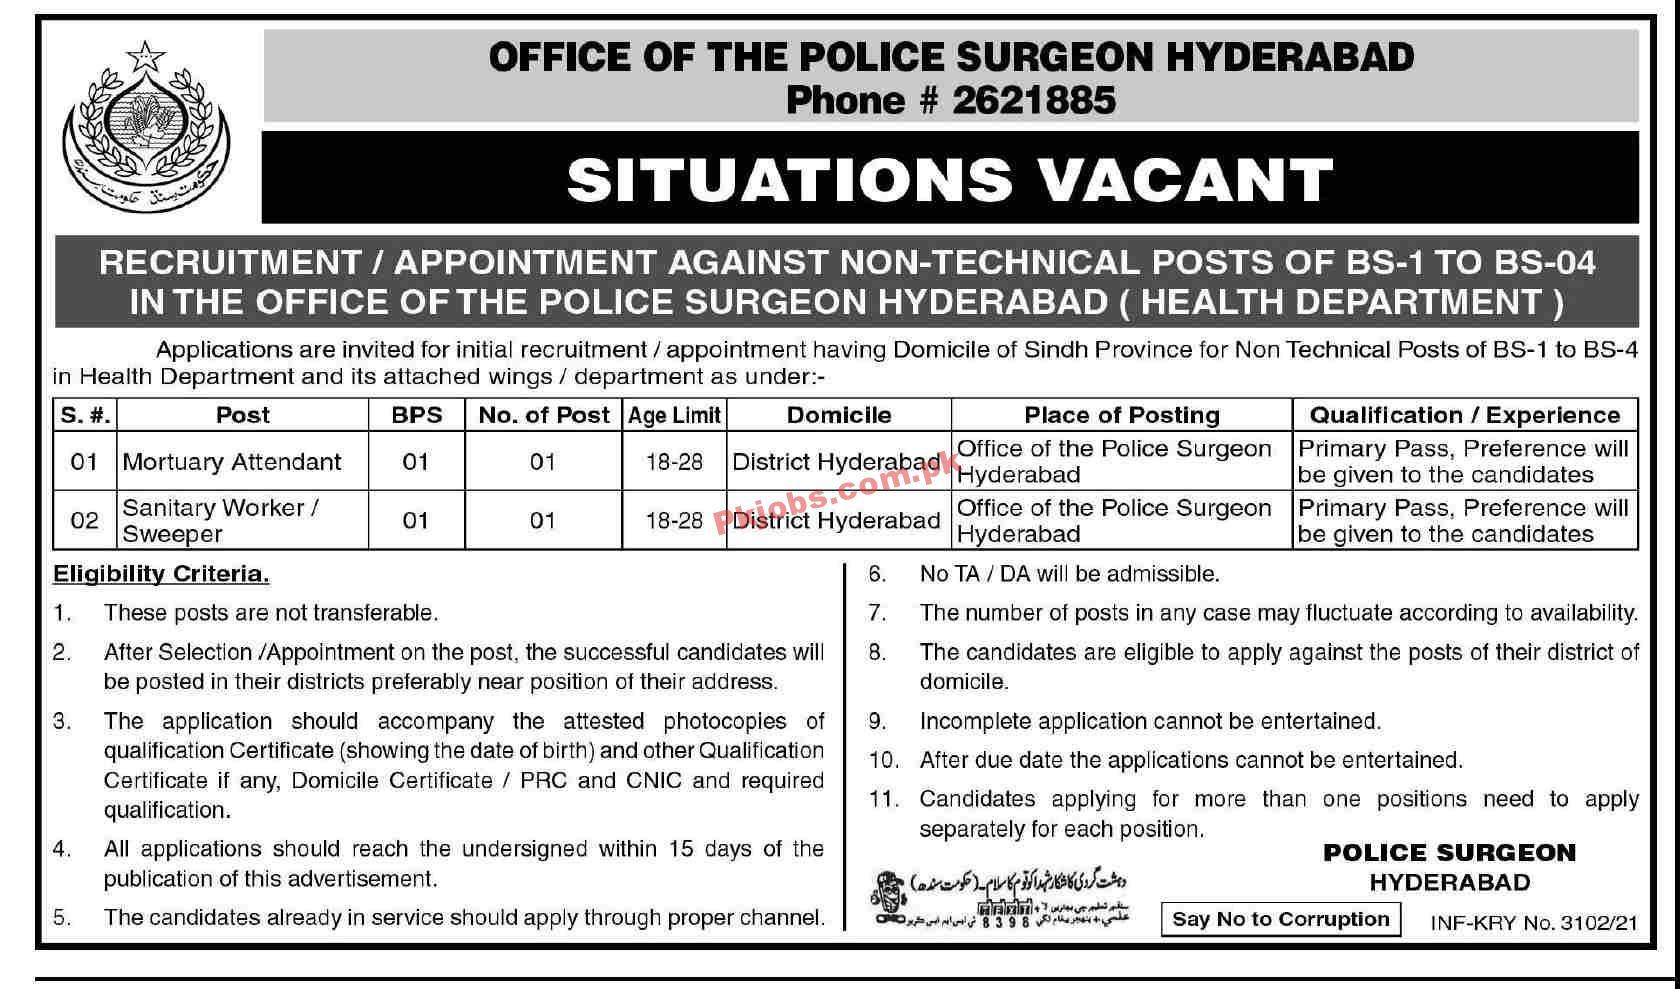 Jobs in Office of the Police Surgeon Hyderabad